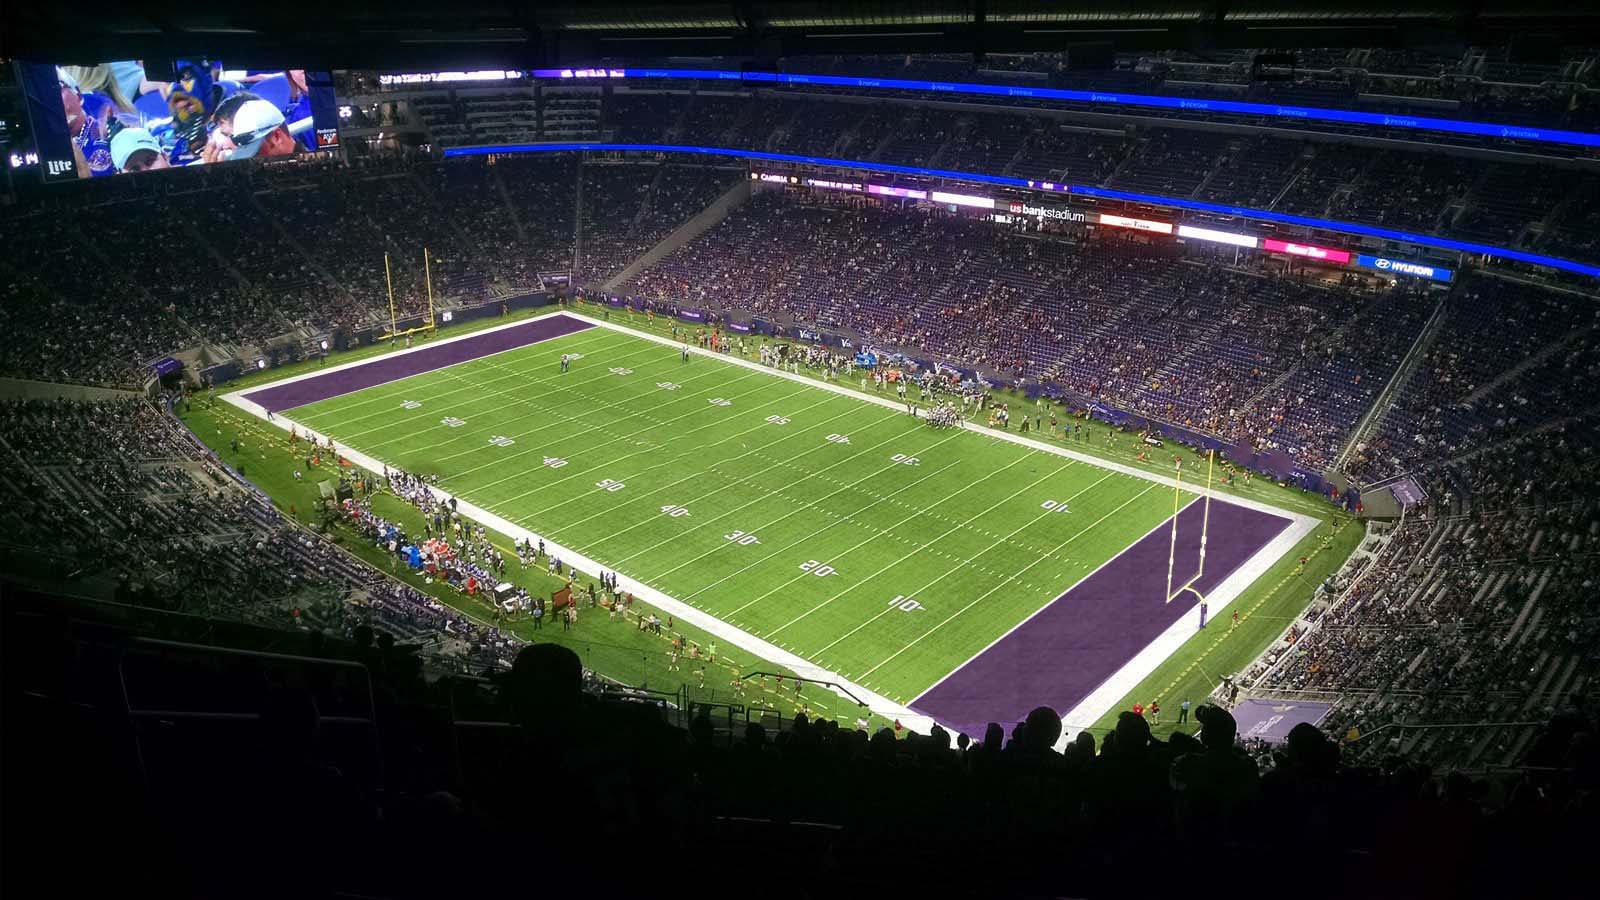 section 333, row 21 seat view  for football - u.s. bank stadium